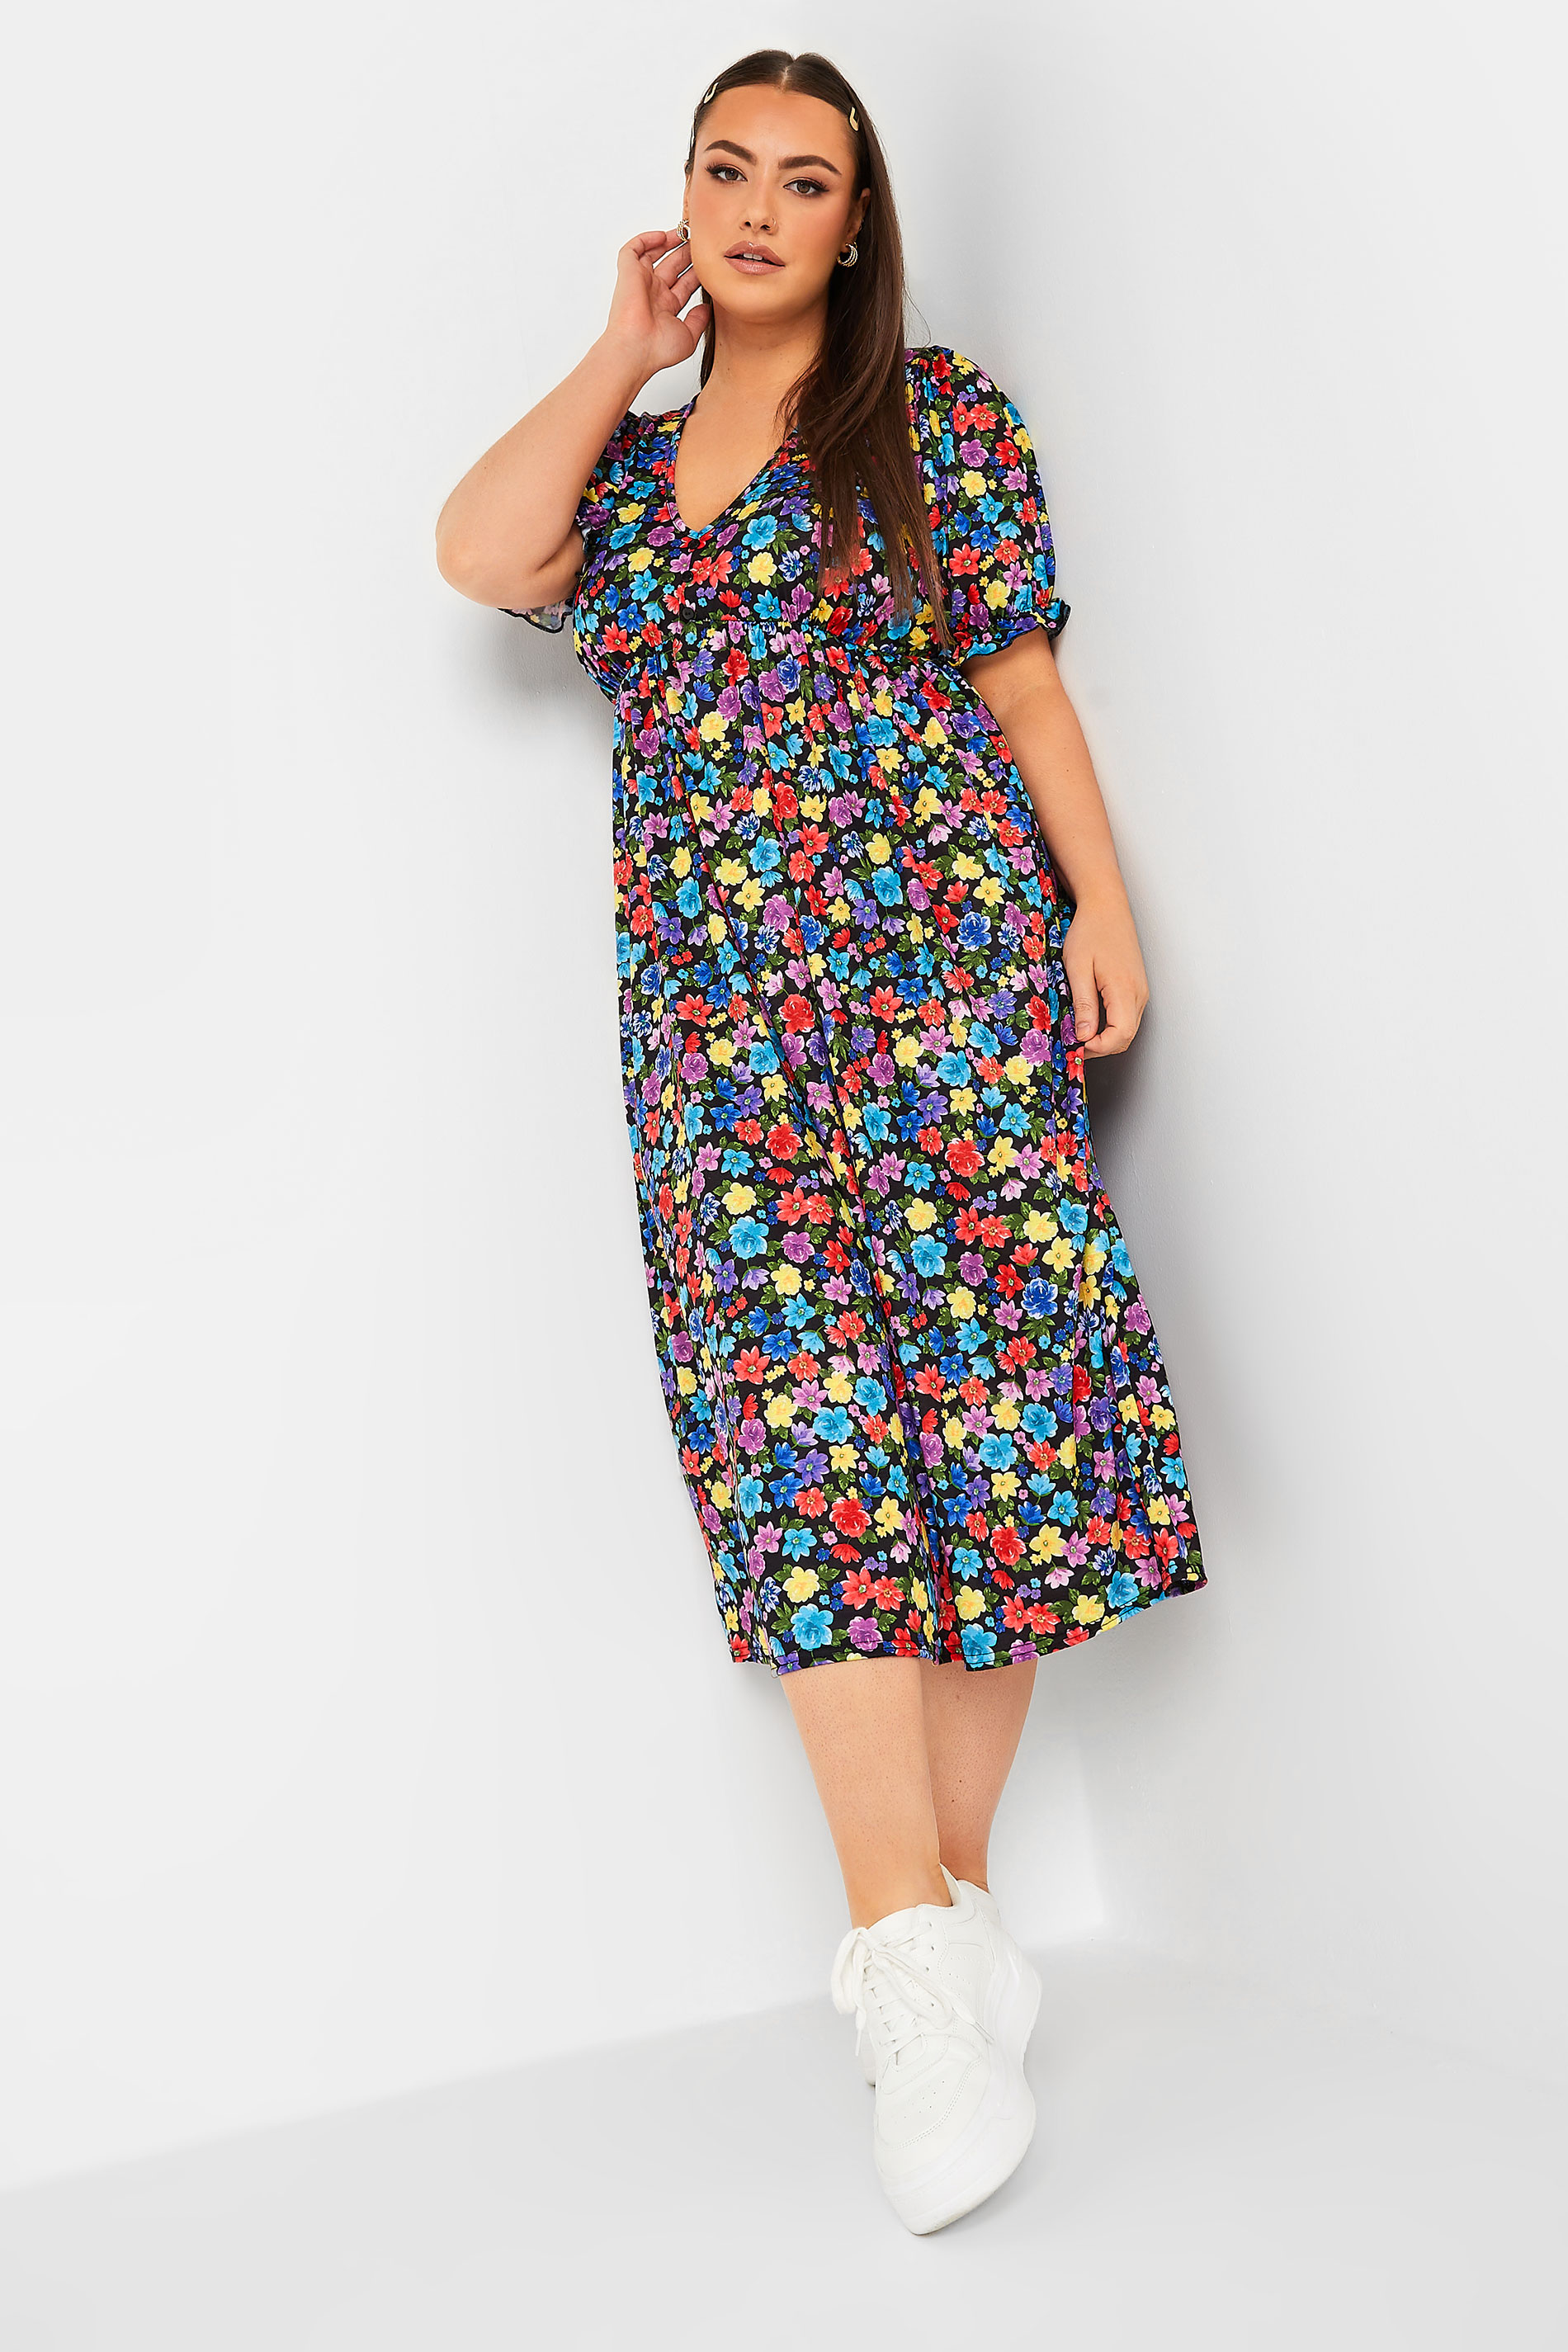 LIMITED COLLECTION Curve Plus Size Black & Blue Floral Print Frill Sleeve Midaxi Dress 2